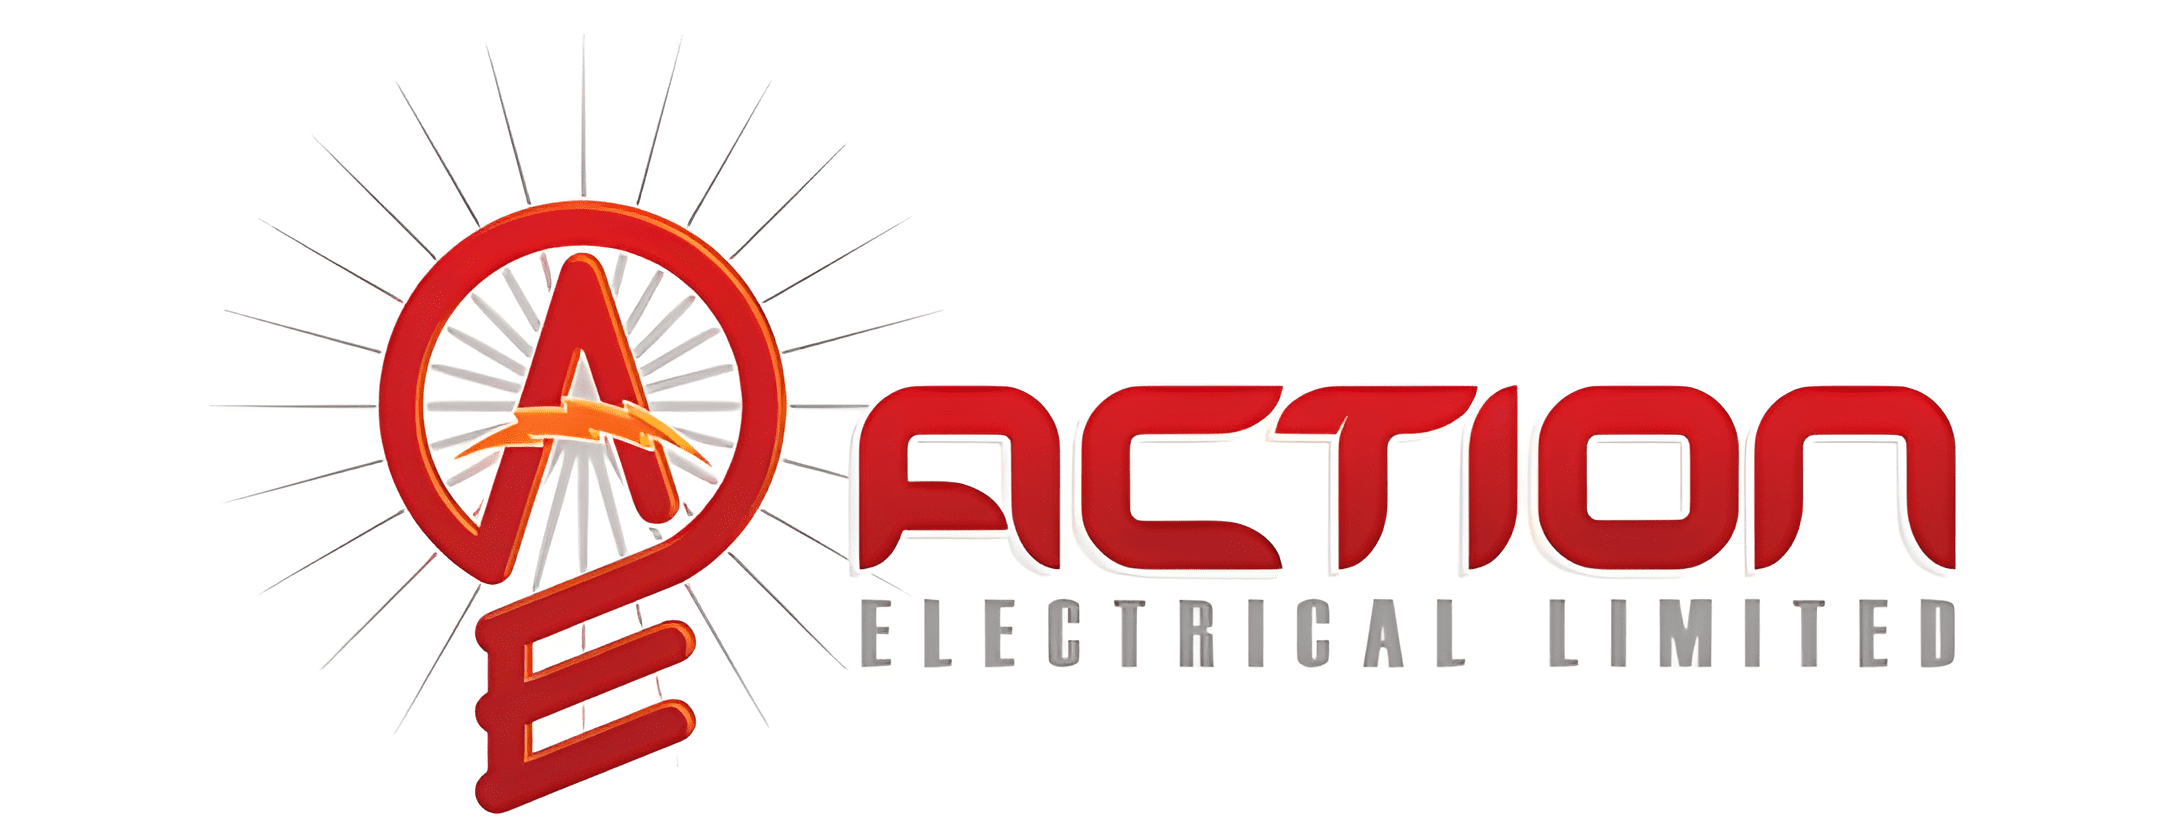 action-electrical-logo.png